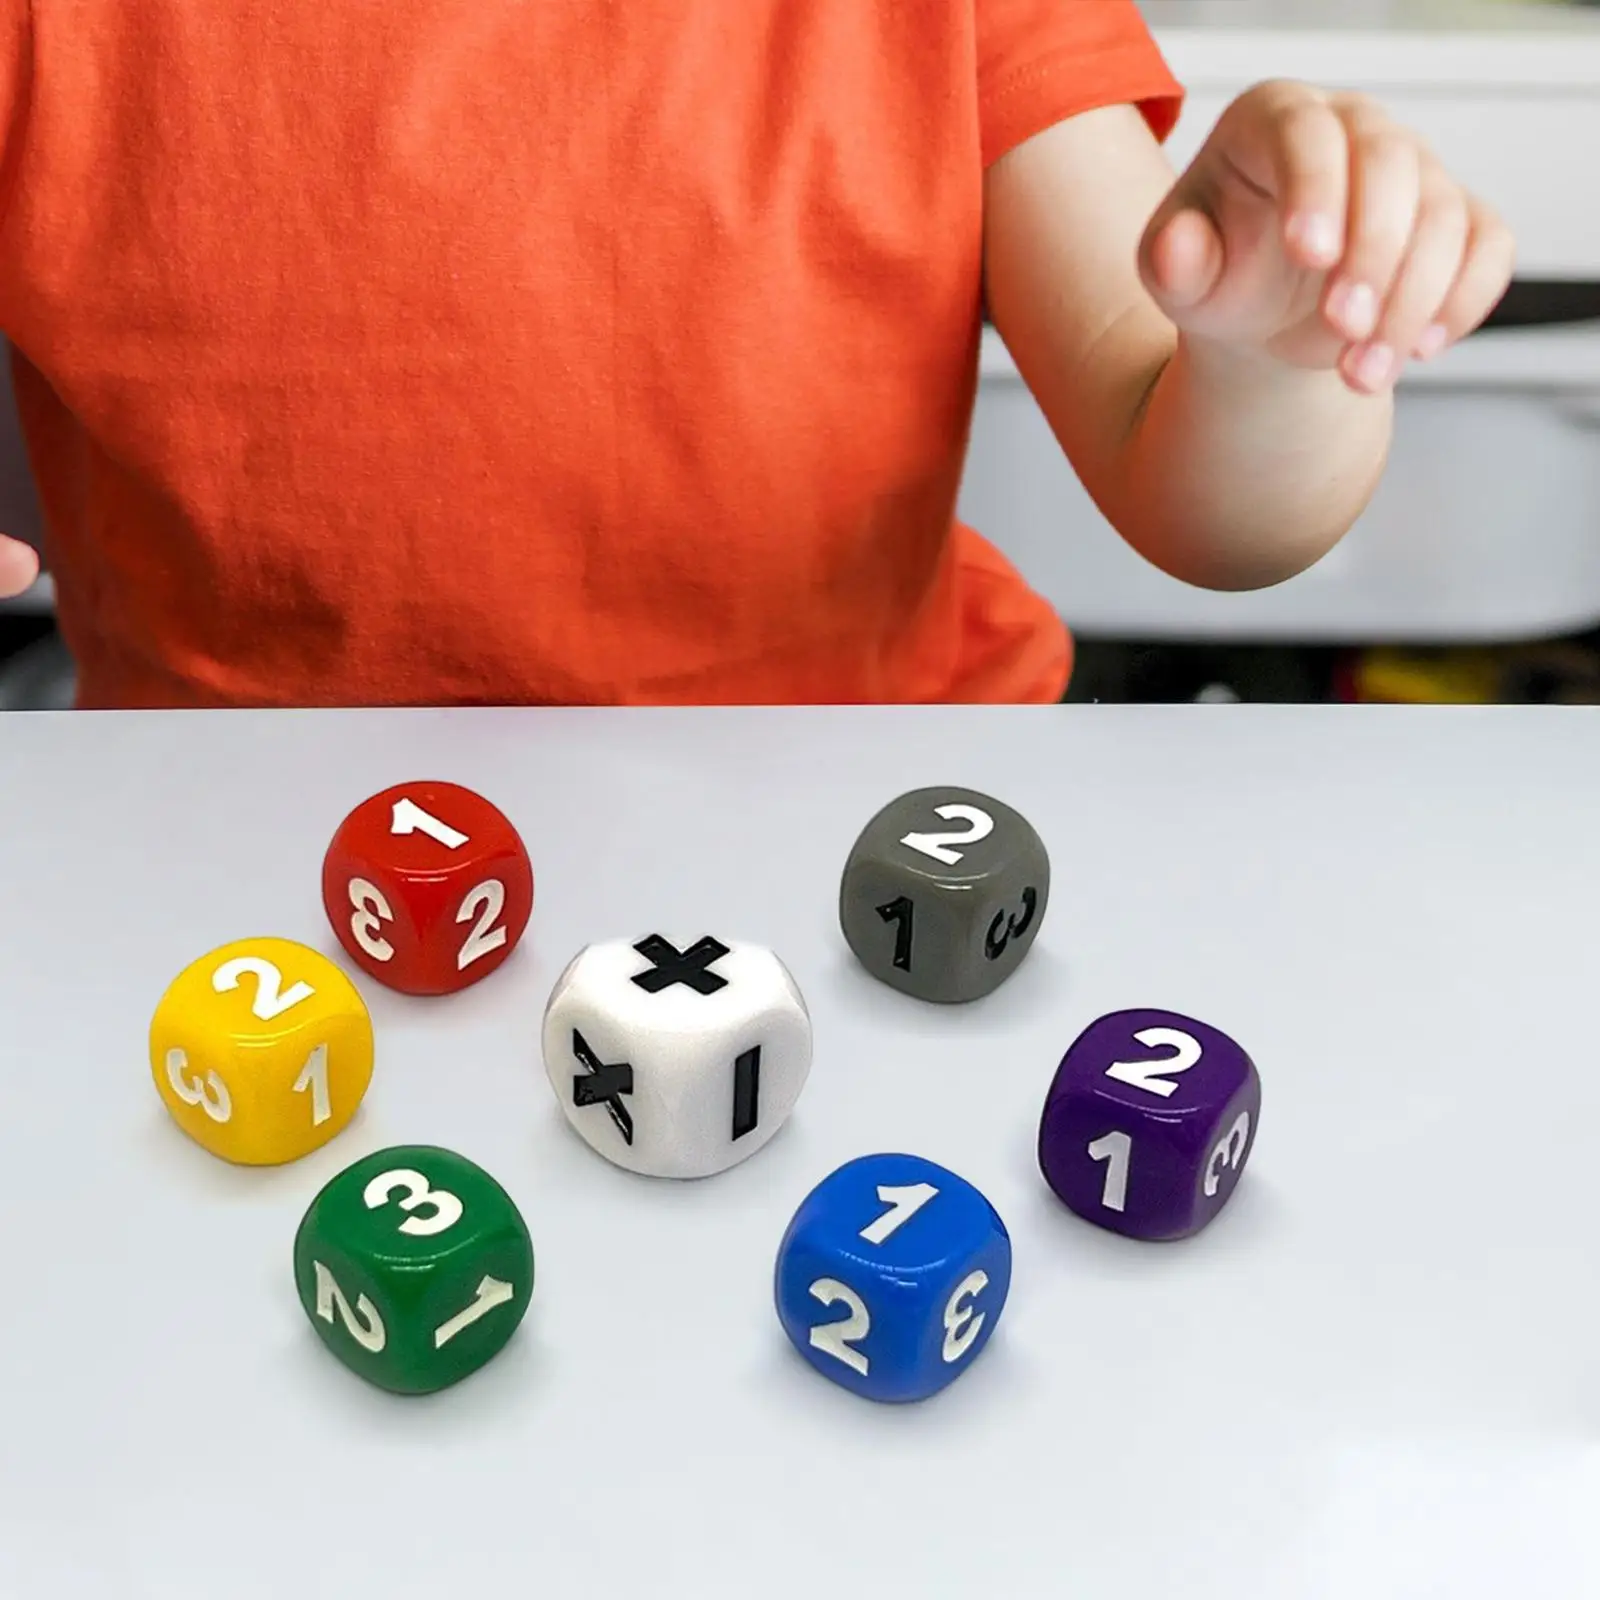 7 Pieces Teaching Dice Counting Toys Lightwheigt Educational Toys for Tabletop